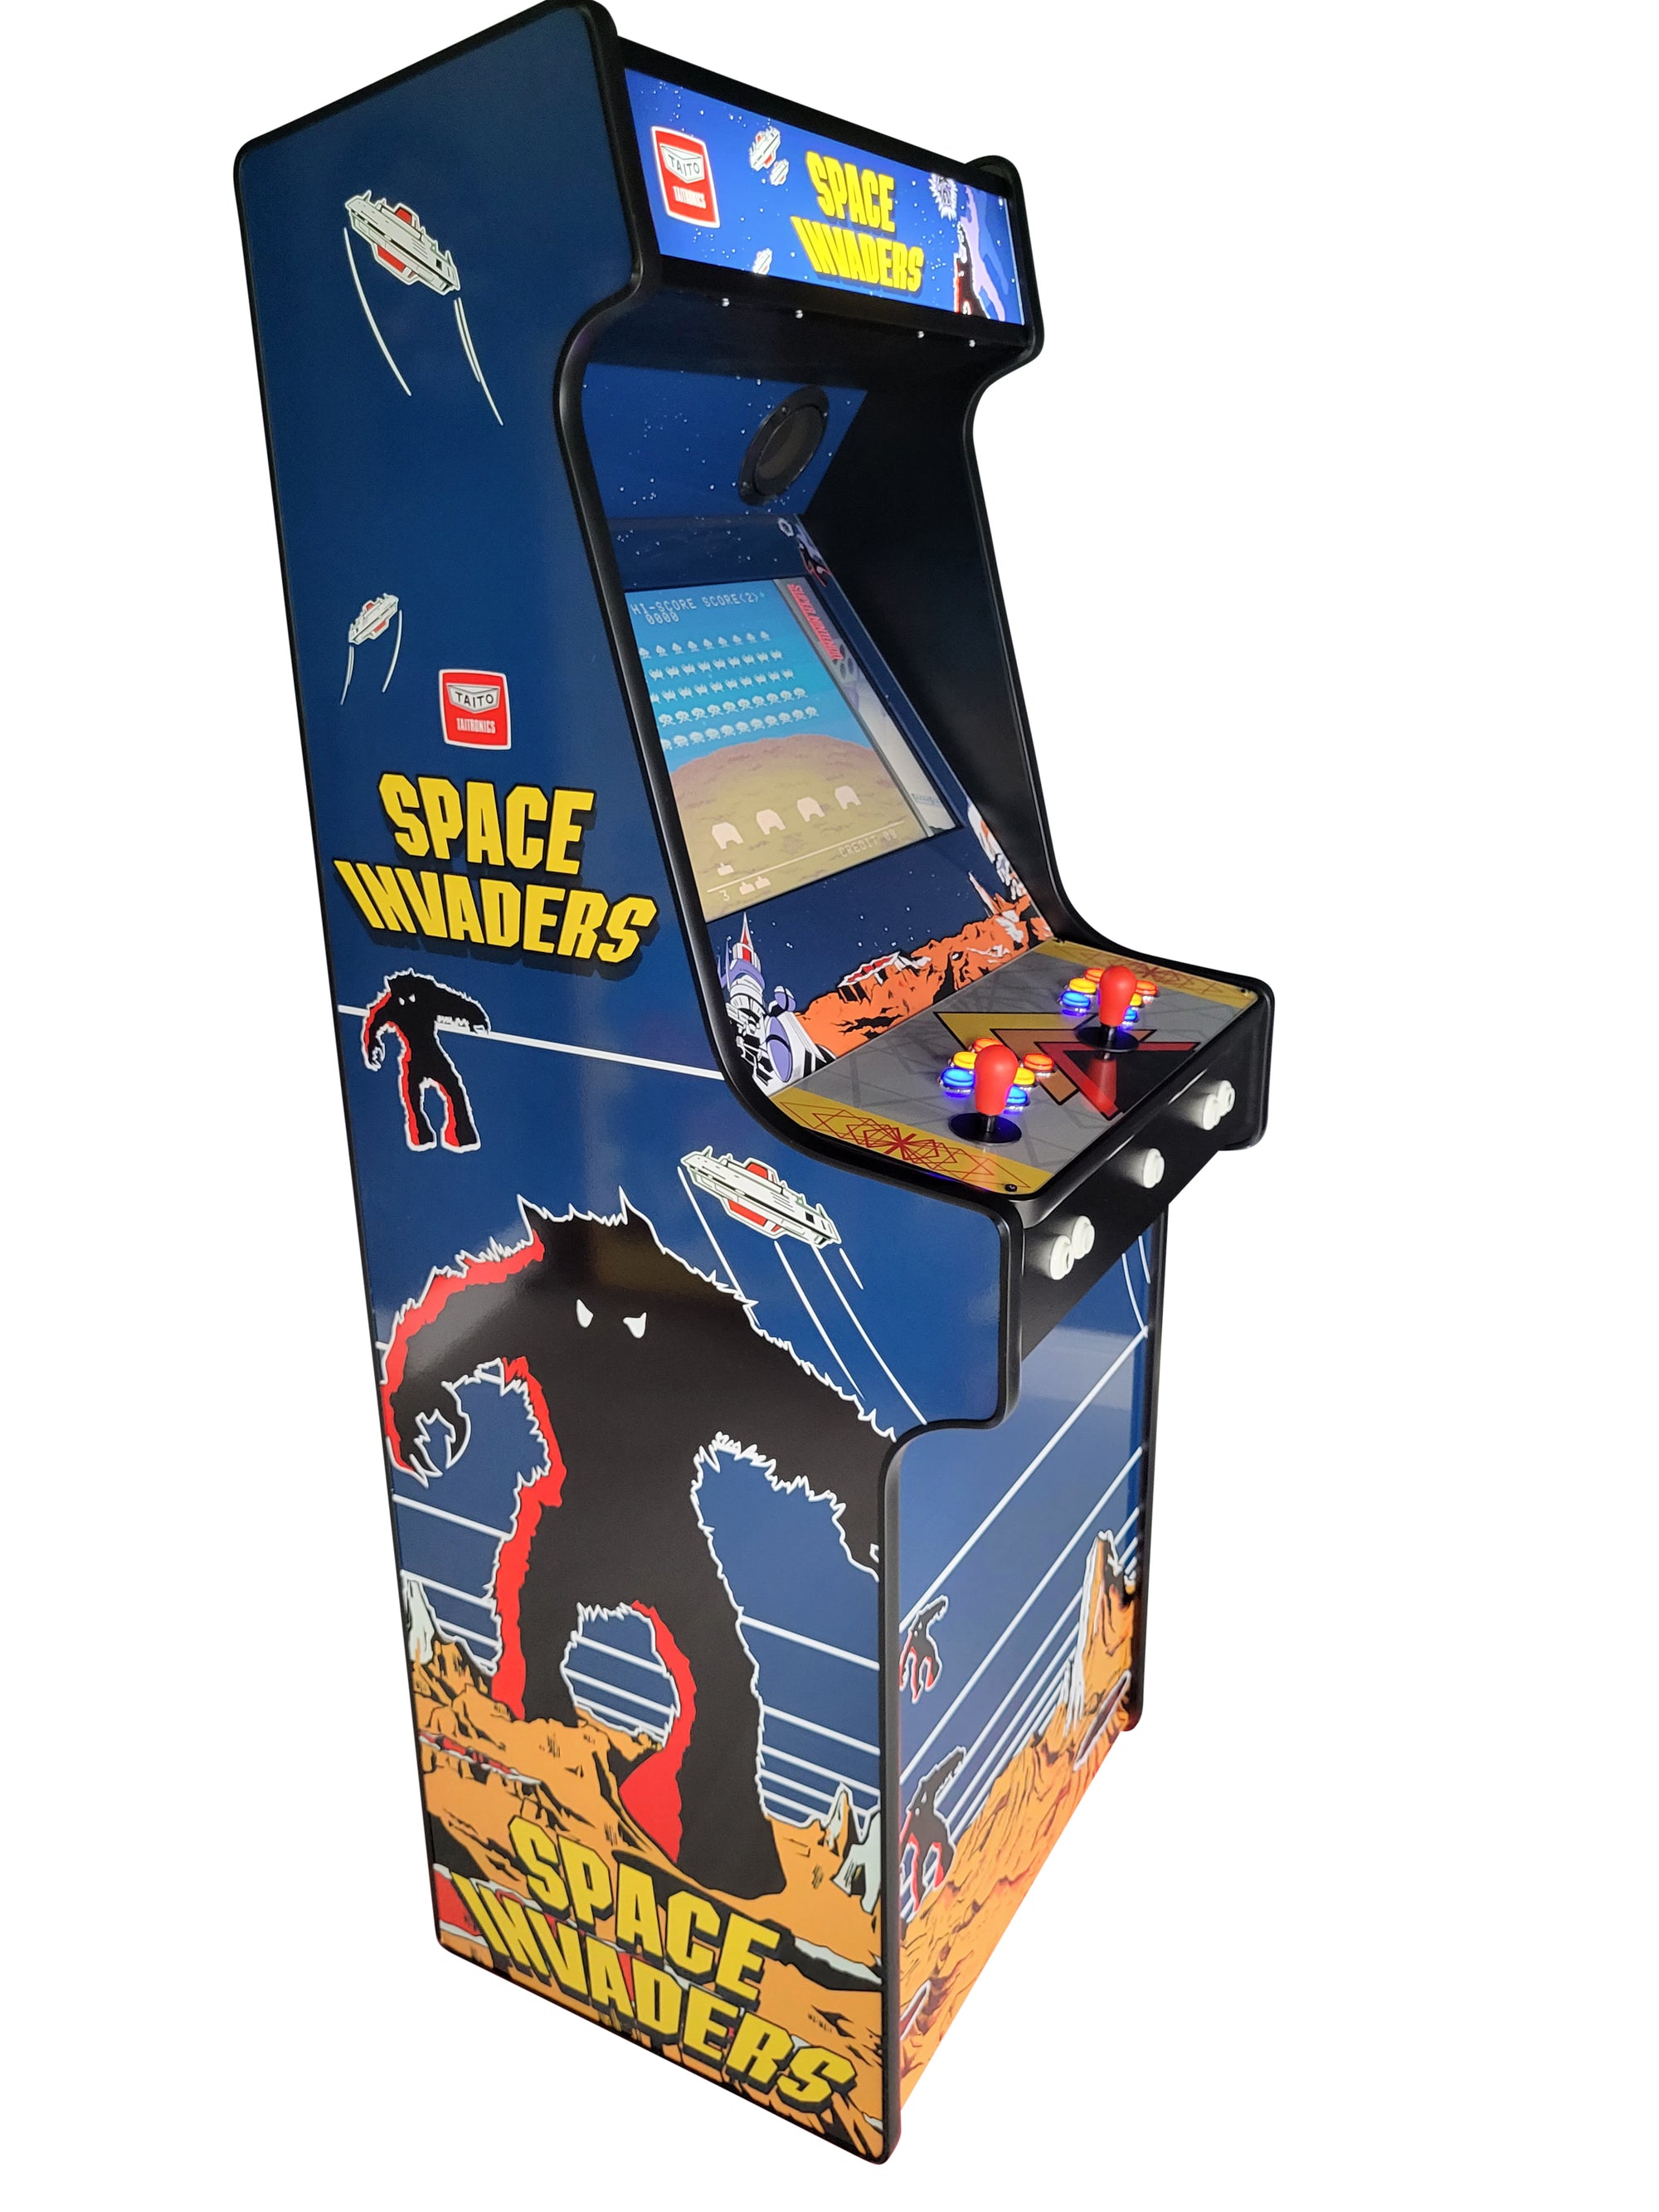 Space Invaders Arcade Machine for Sale